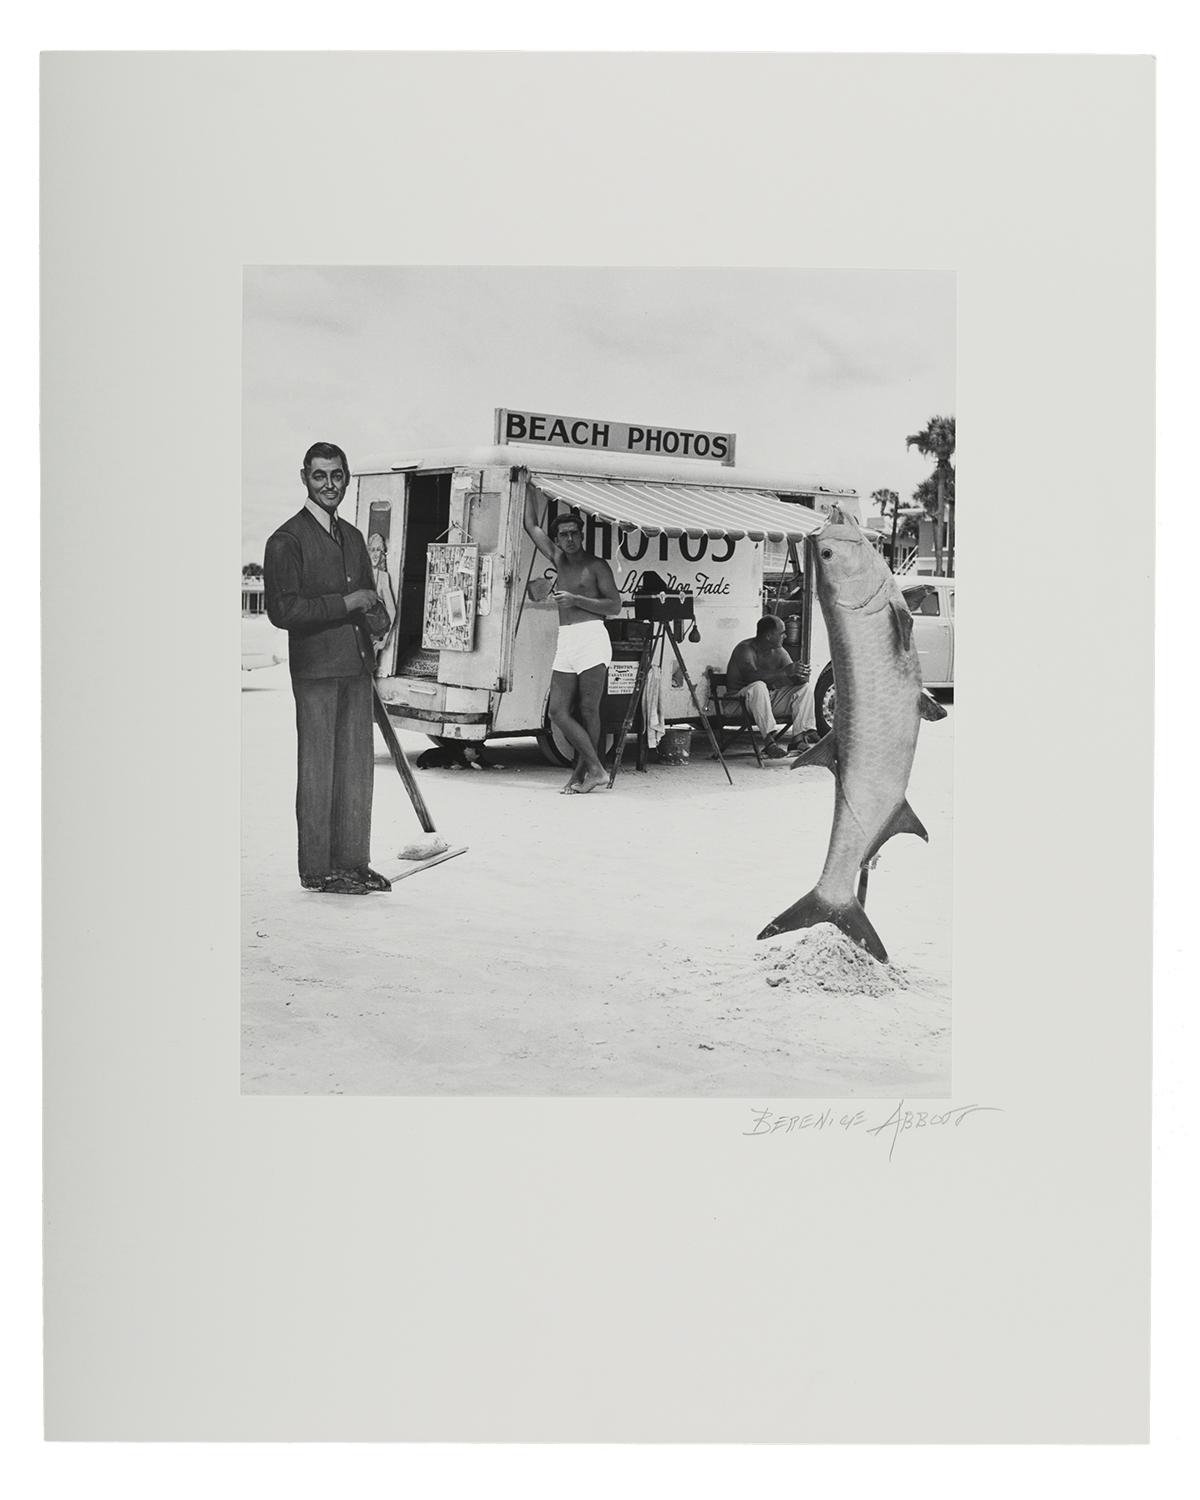 A photo of a man next to a giant fish added in post-production on a beach in Florida from 1954.